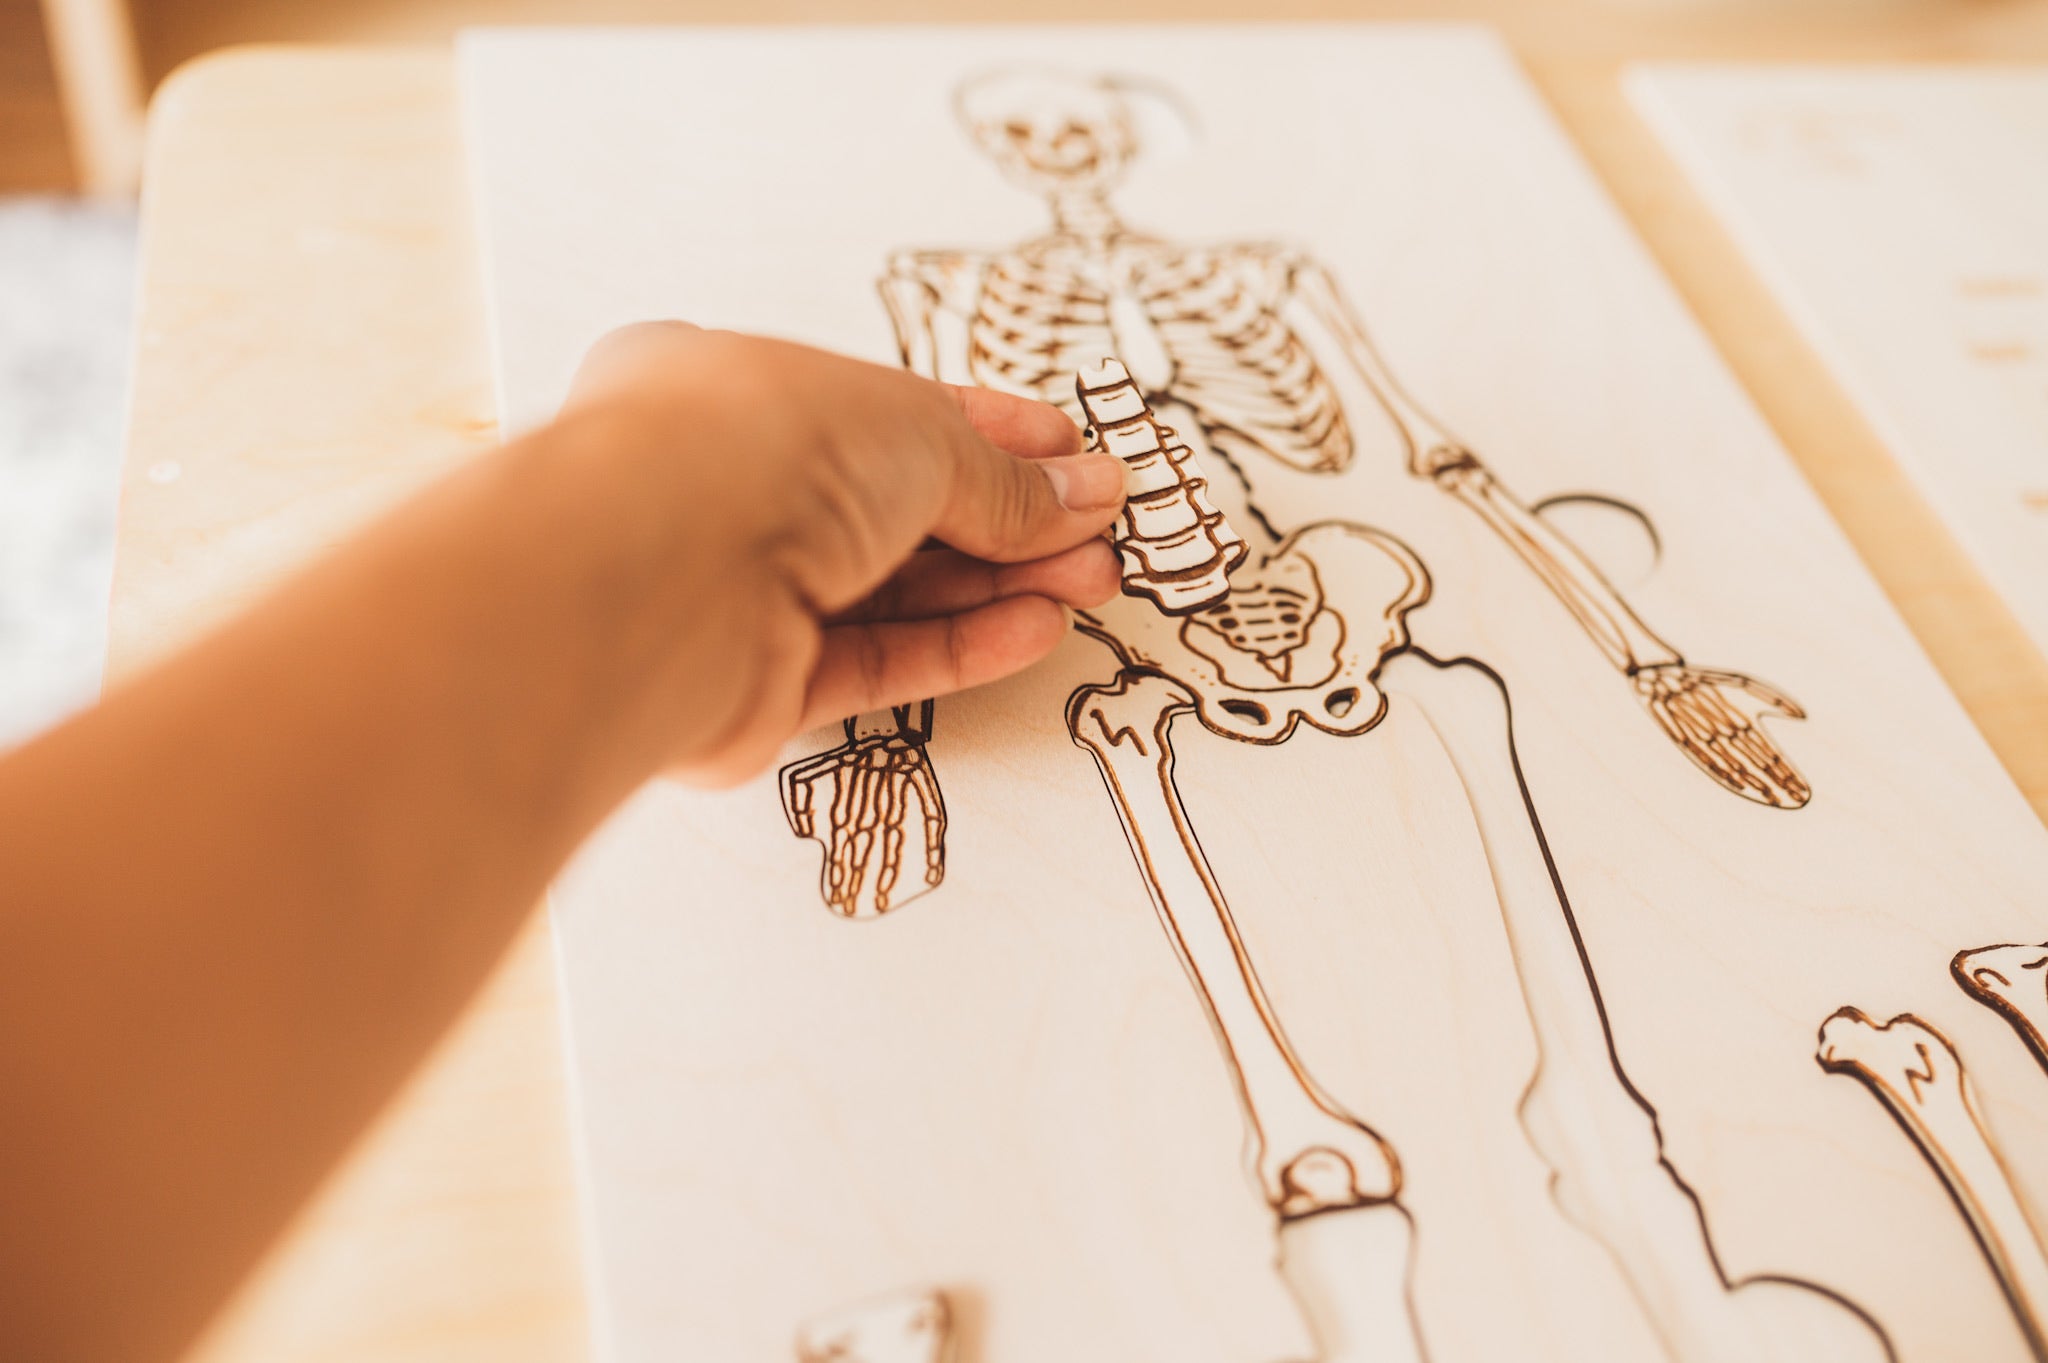 Anatomy of Skeletal System and Puzzle